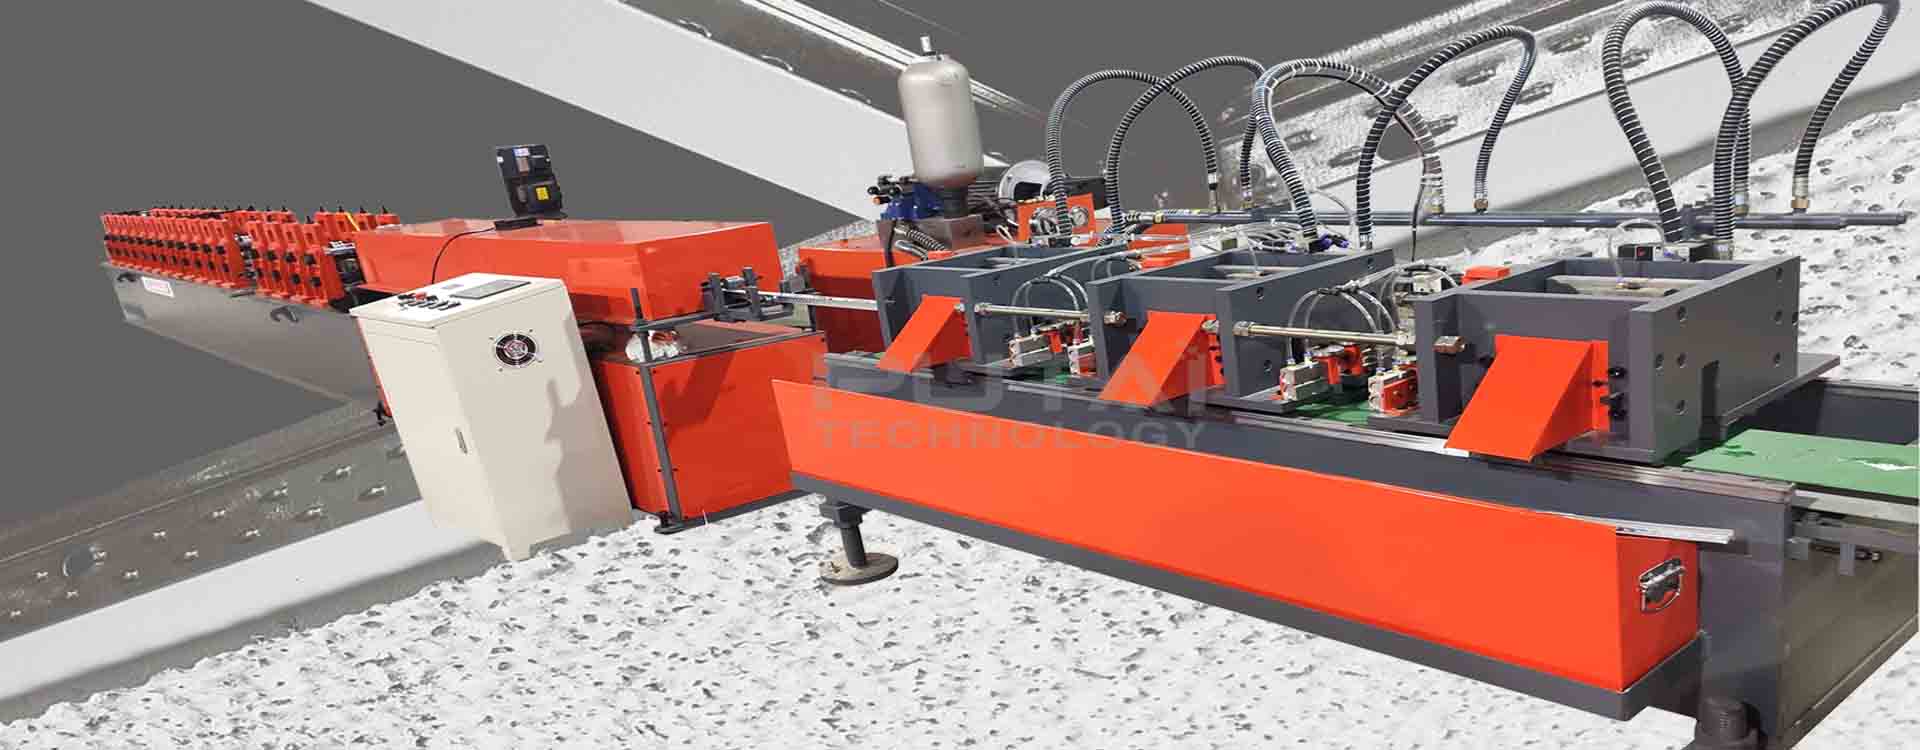 t grid machinery(production line)